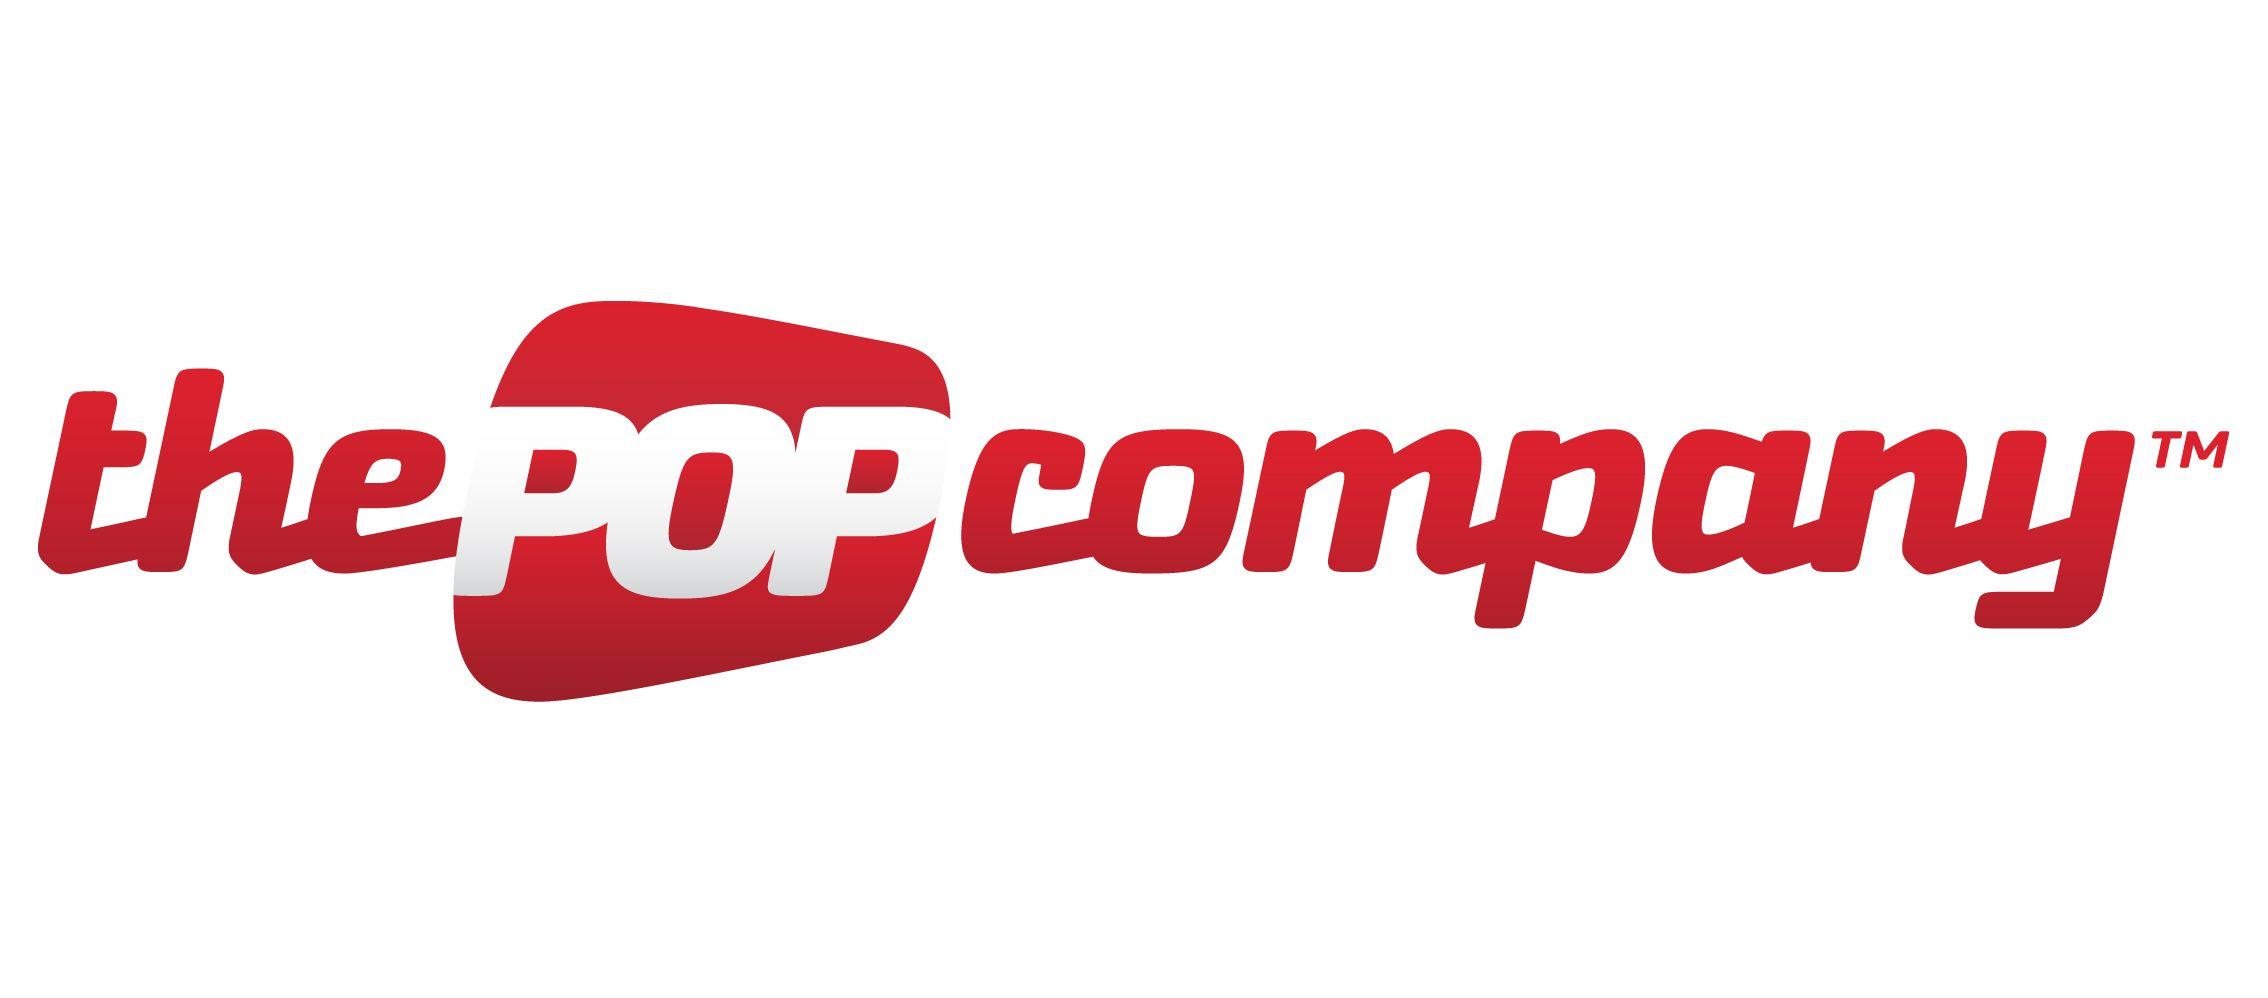 Pop Company Logo - AFS Technologies Acquires The POP Company, a Mobile Sales Force